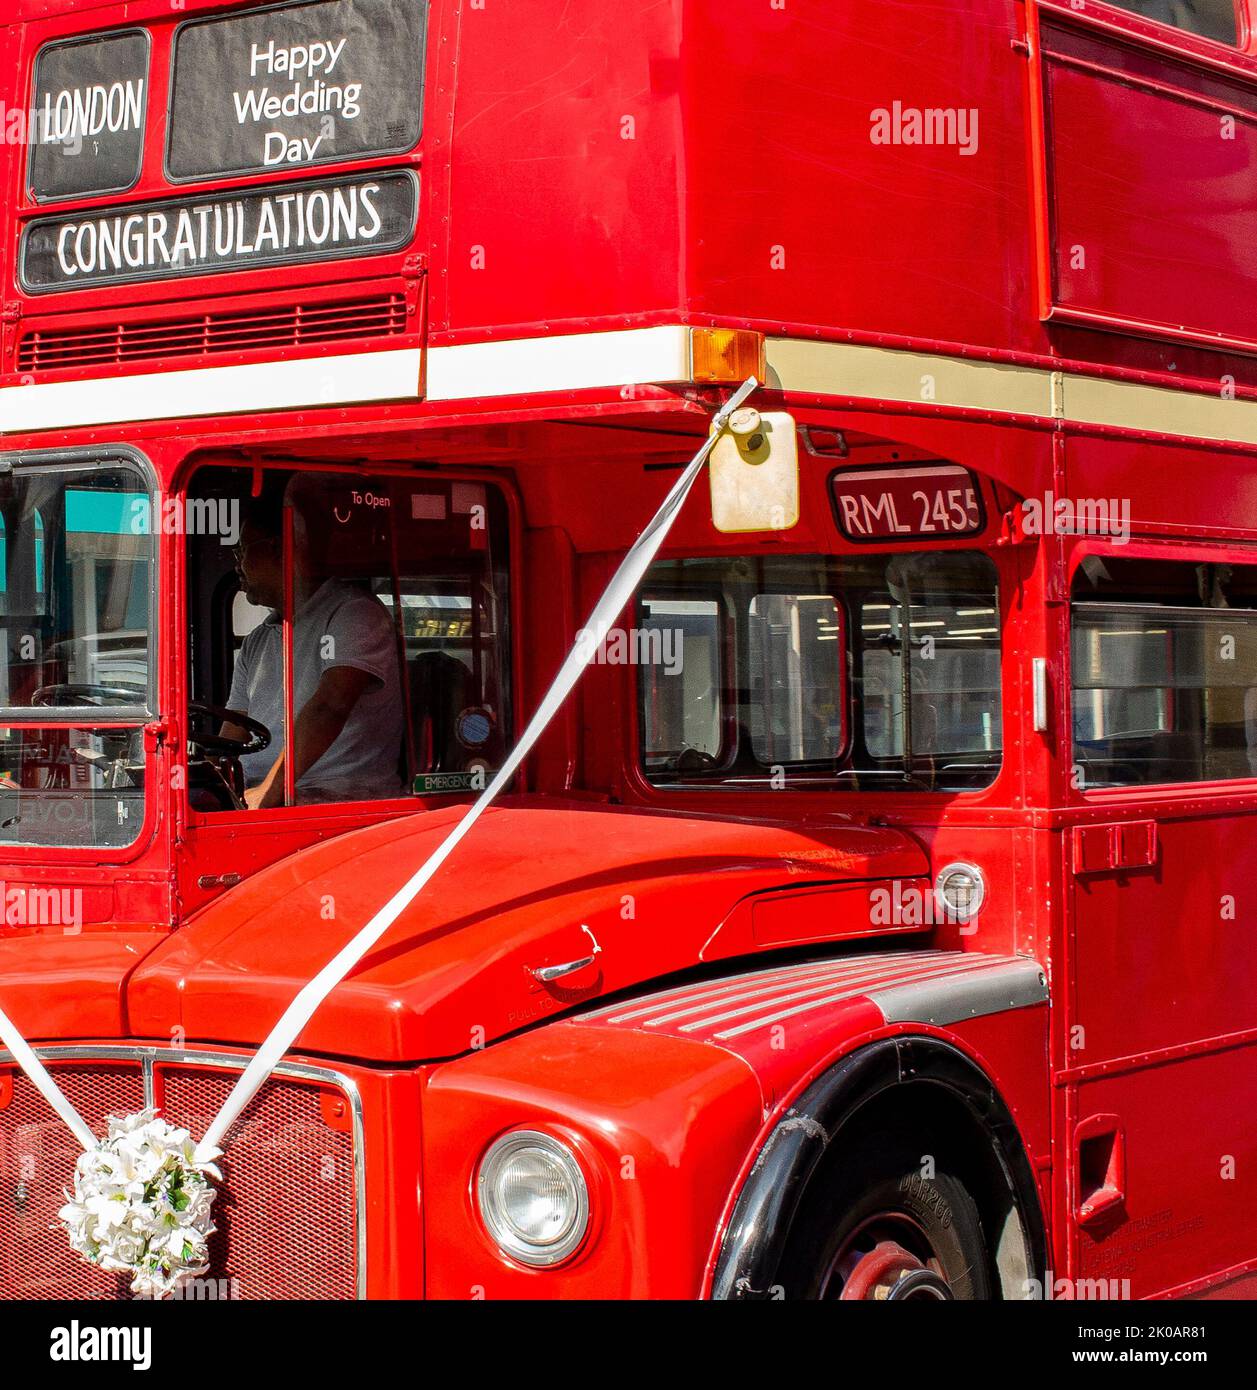 Red London Transport bus acting as private hire for weddings with sash and 'Happy Wedding Day' Stock Photo